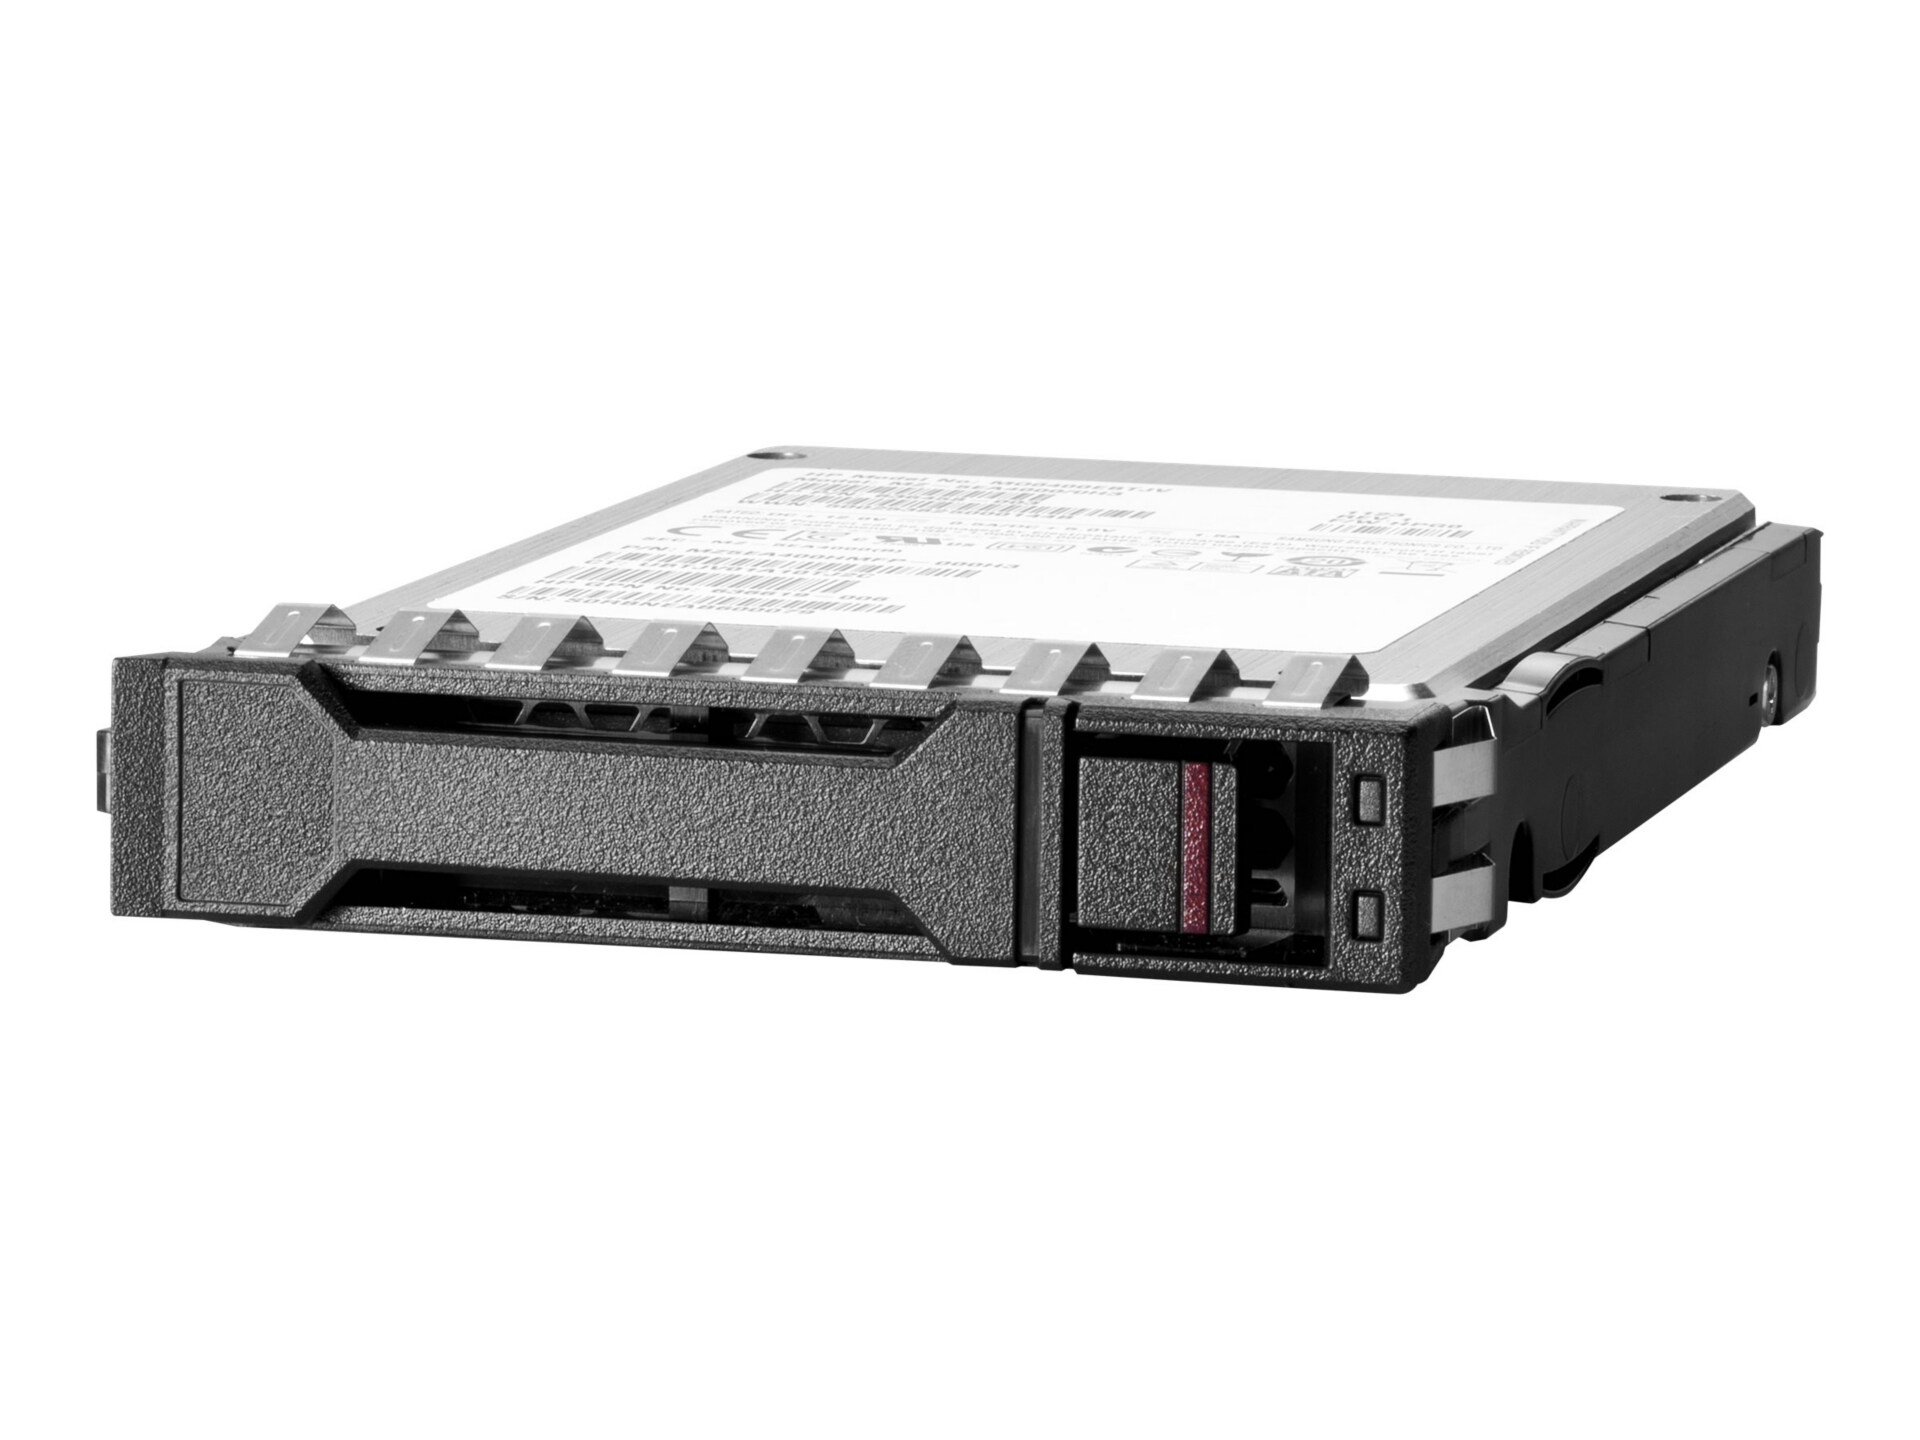 HPE - SSD - Mixed Use, High Performance - 1.6 TB - U.3 PCIe 4.0 (NVMe) - factory integrated